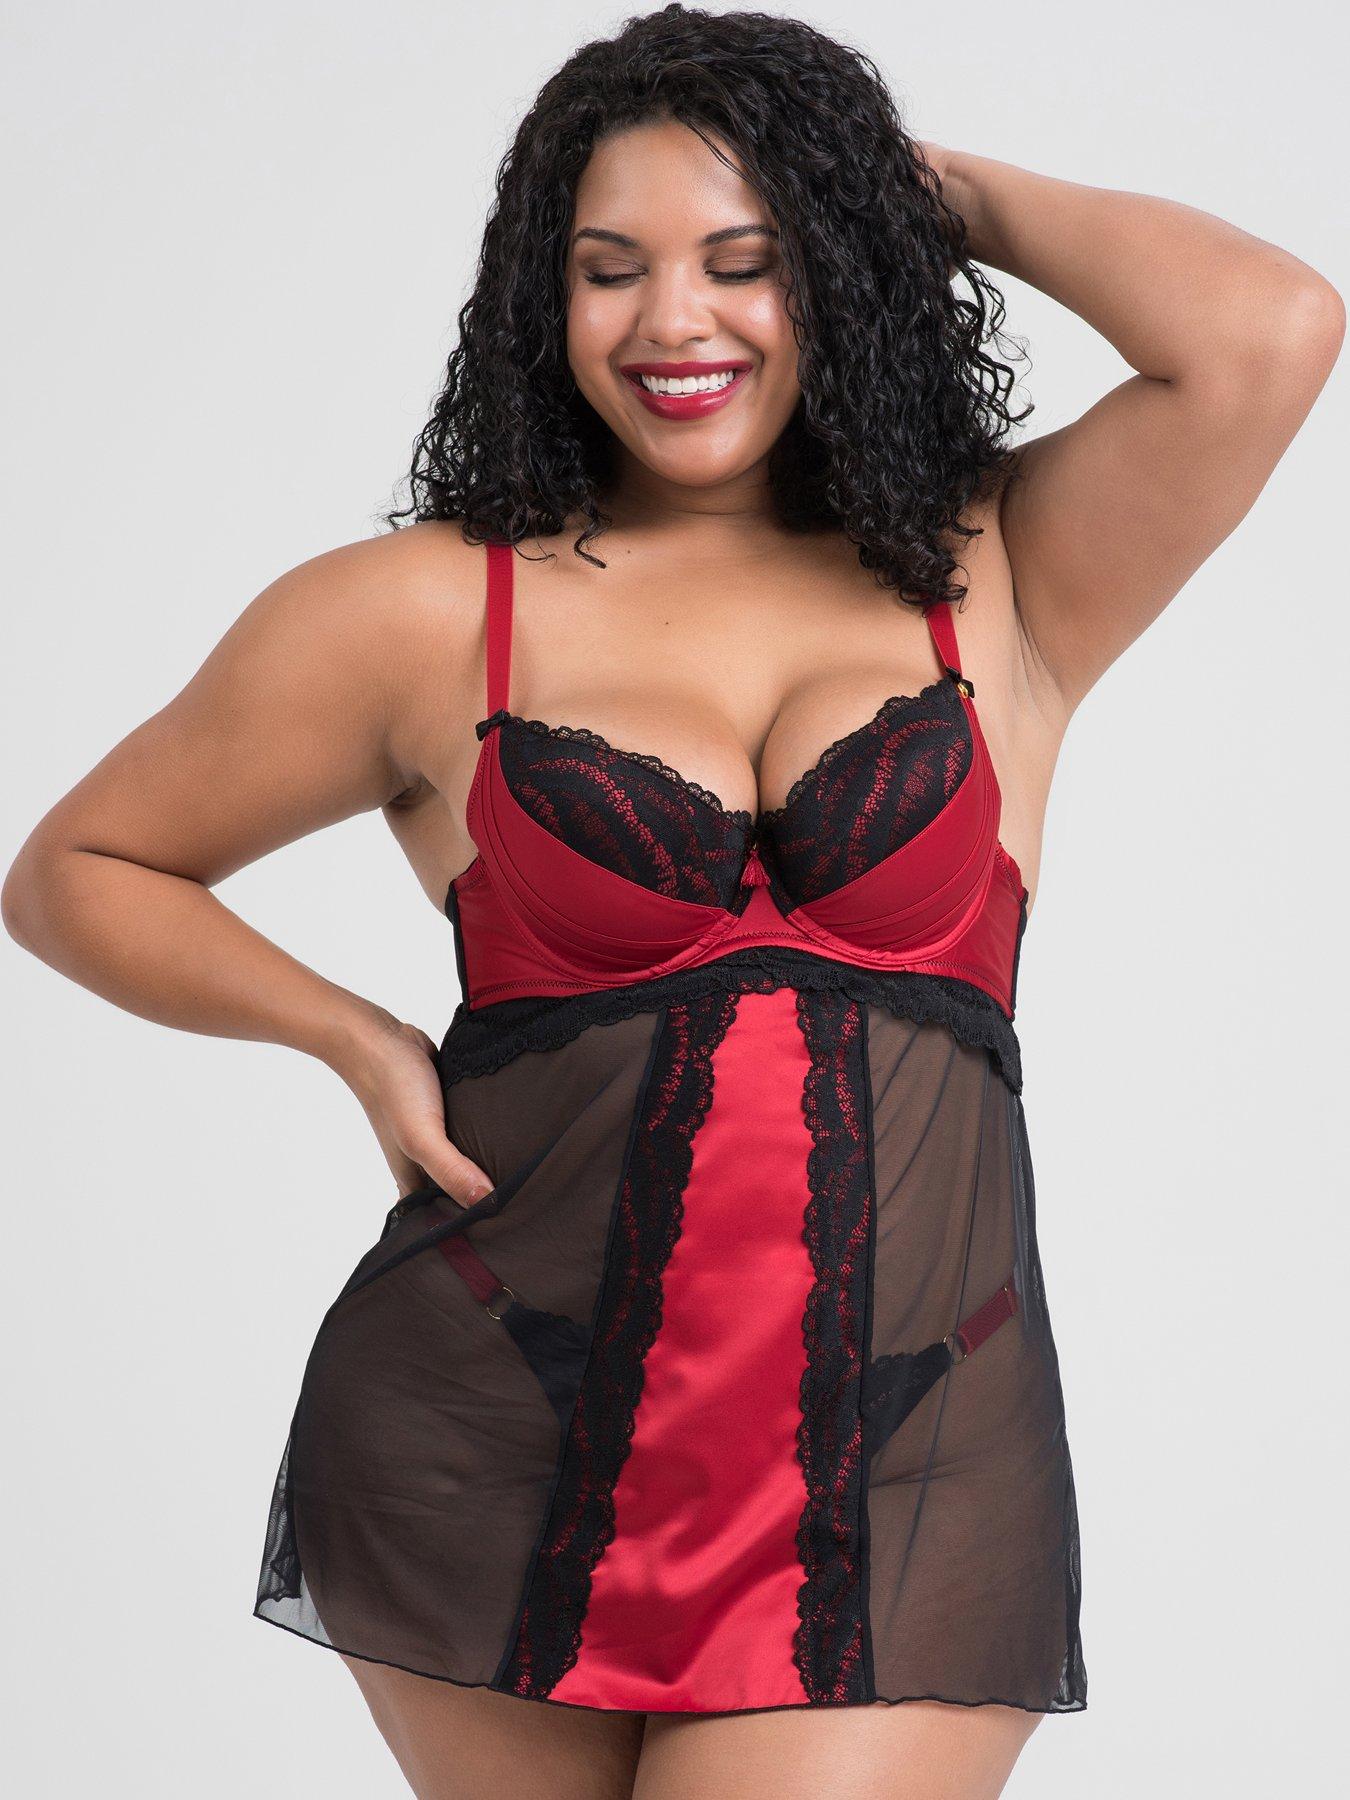 Lovehoney 2-Piece Empress Satin and Lace Chemise Set - Black/Red